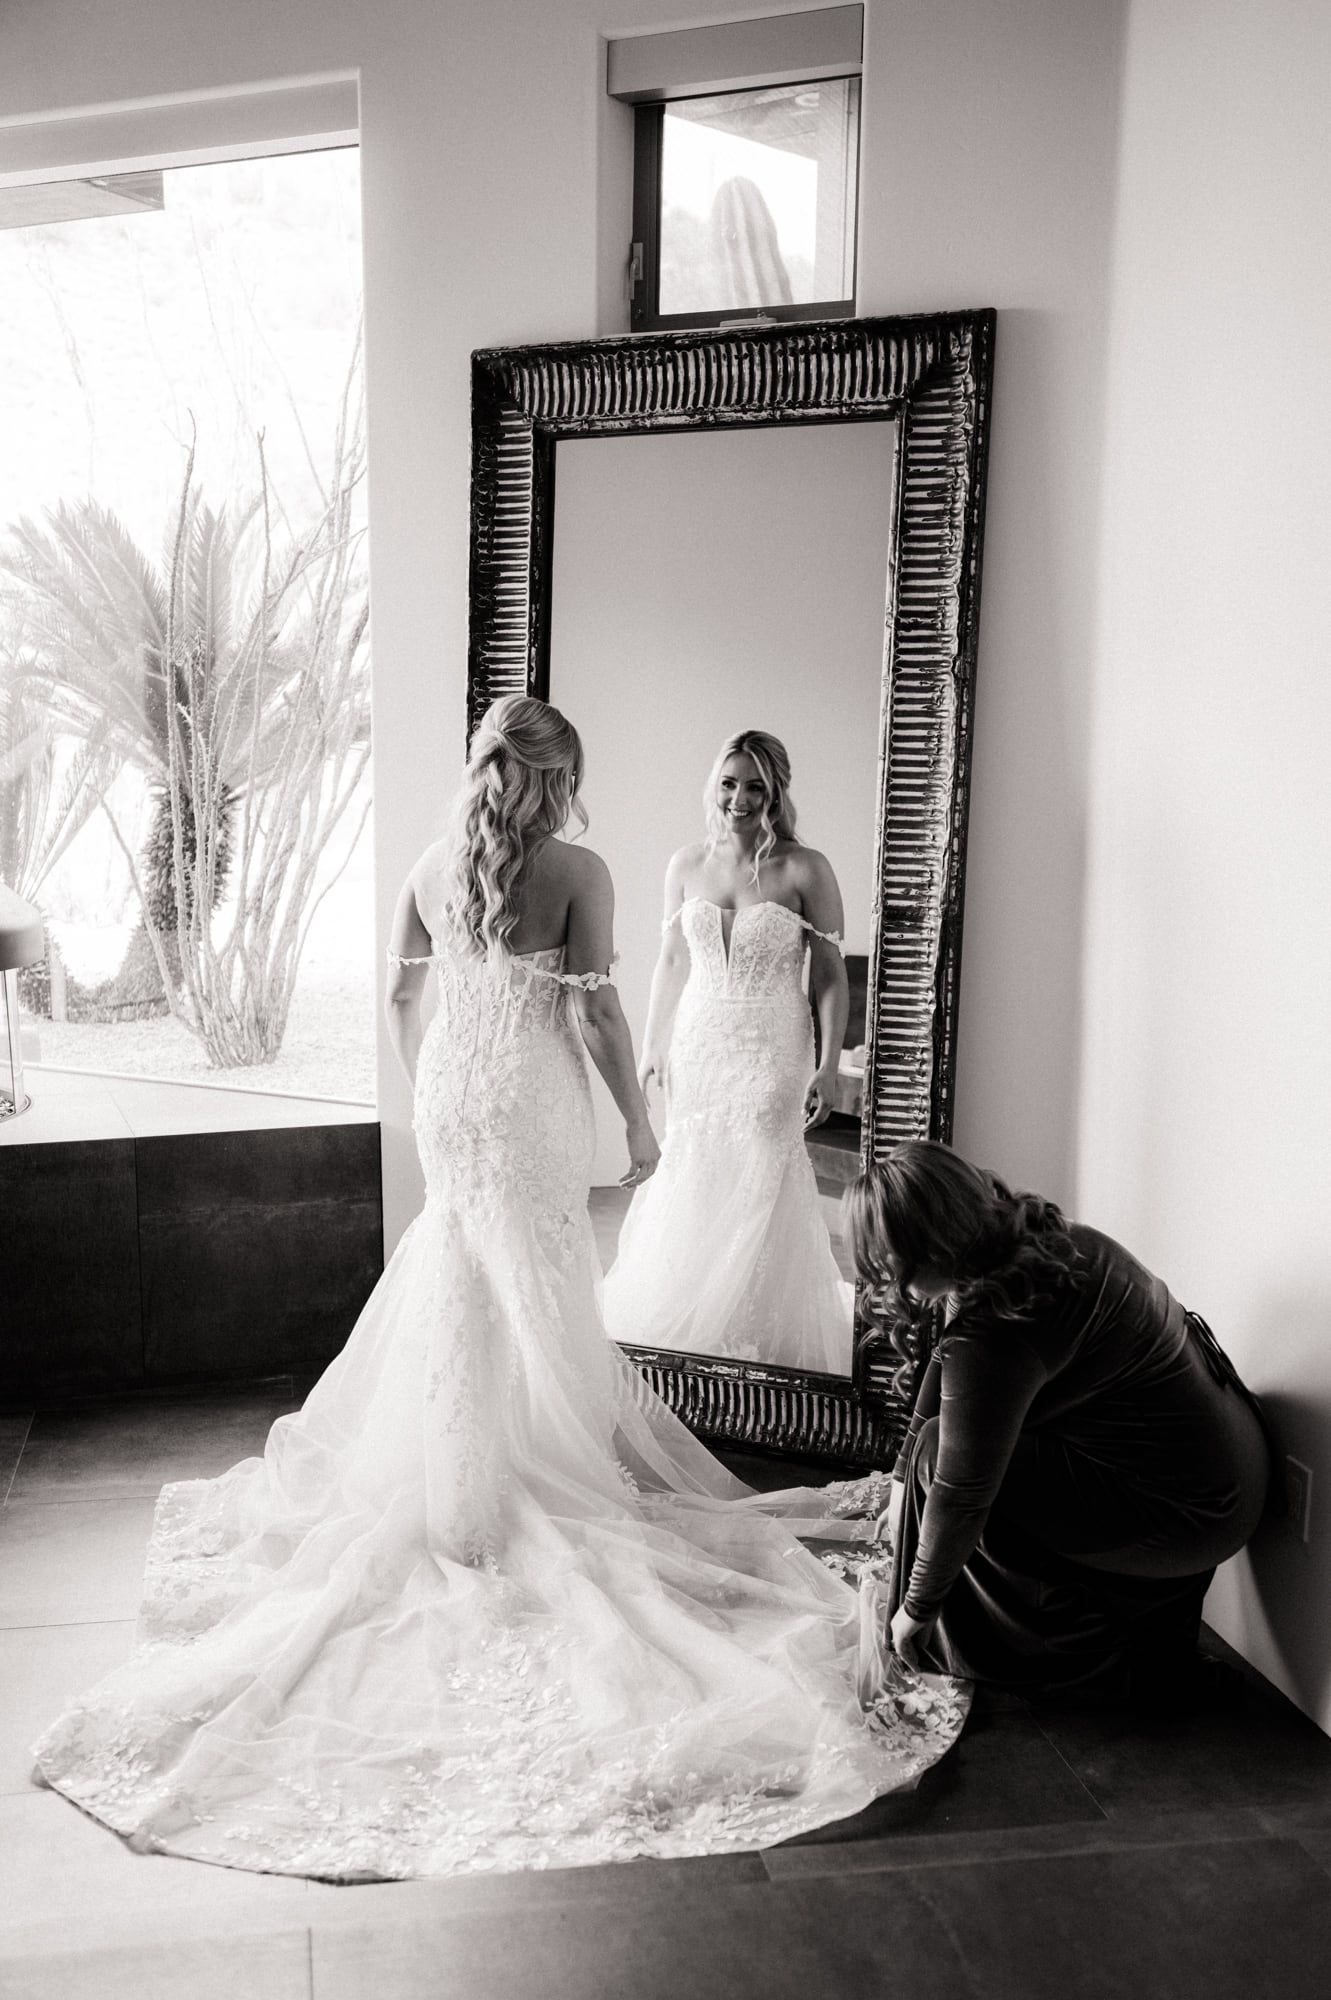 Bride in wedding dress looks in a large mirror in her getting ready room while a bridesmaid pulls out the train.